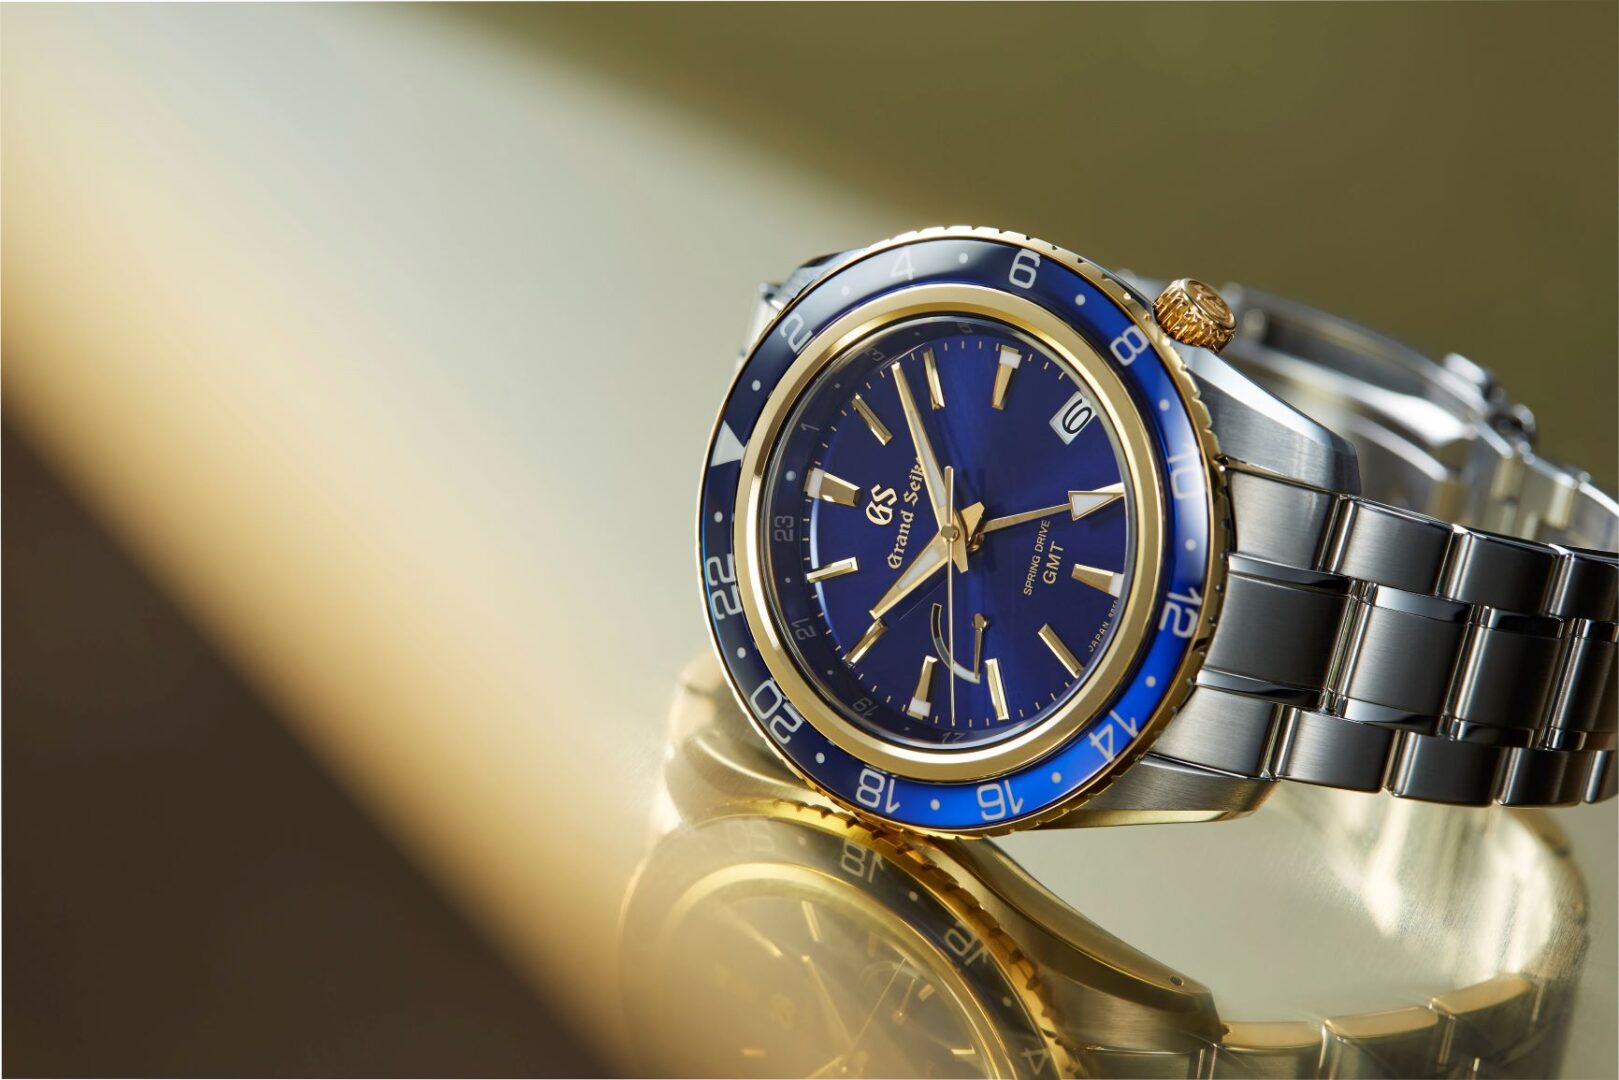 A Spring Drive GMT that shines in 18k yellow gold and blue | Tilia Speculum